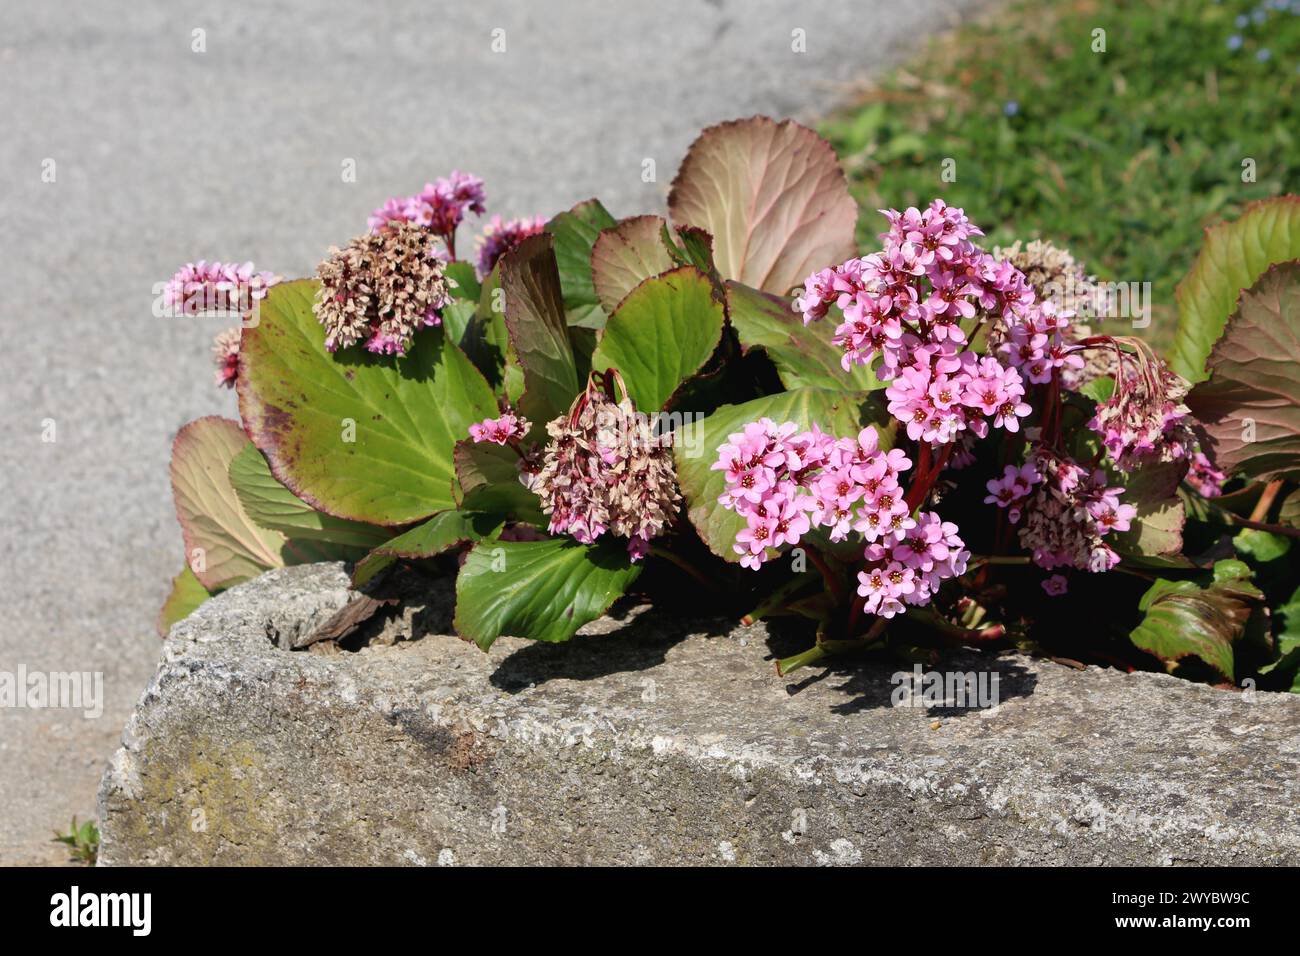 Bergenia or Elephant eared saxifrage or Elephants ears rhizomatous evergreen perennial flowering plant with dense bunch of open blooming Stock Photo